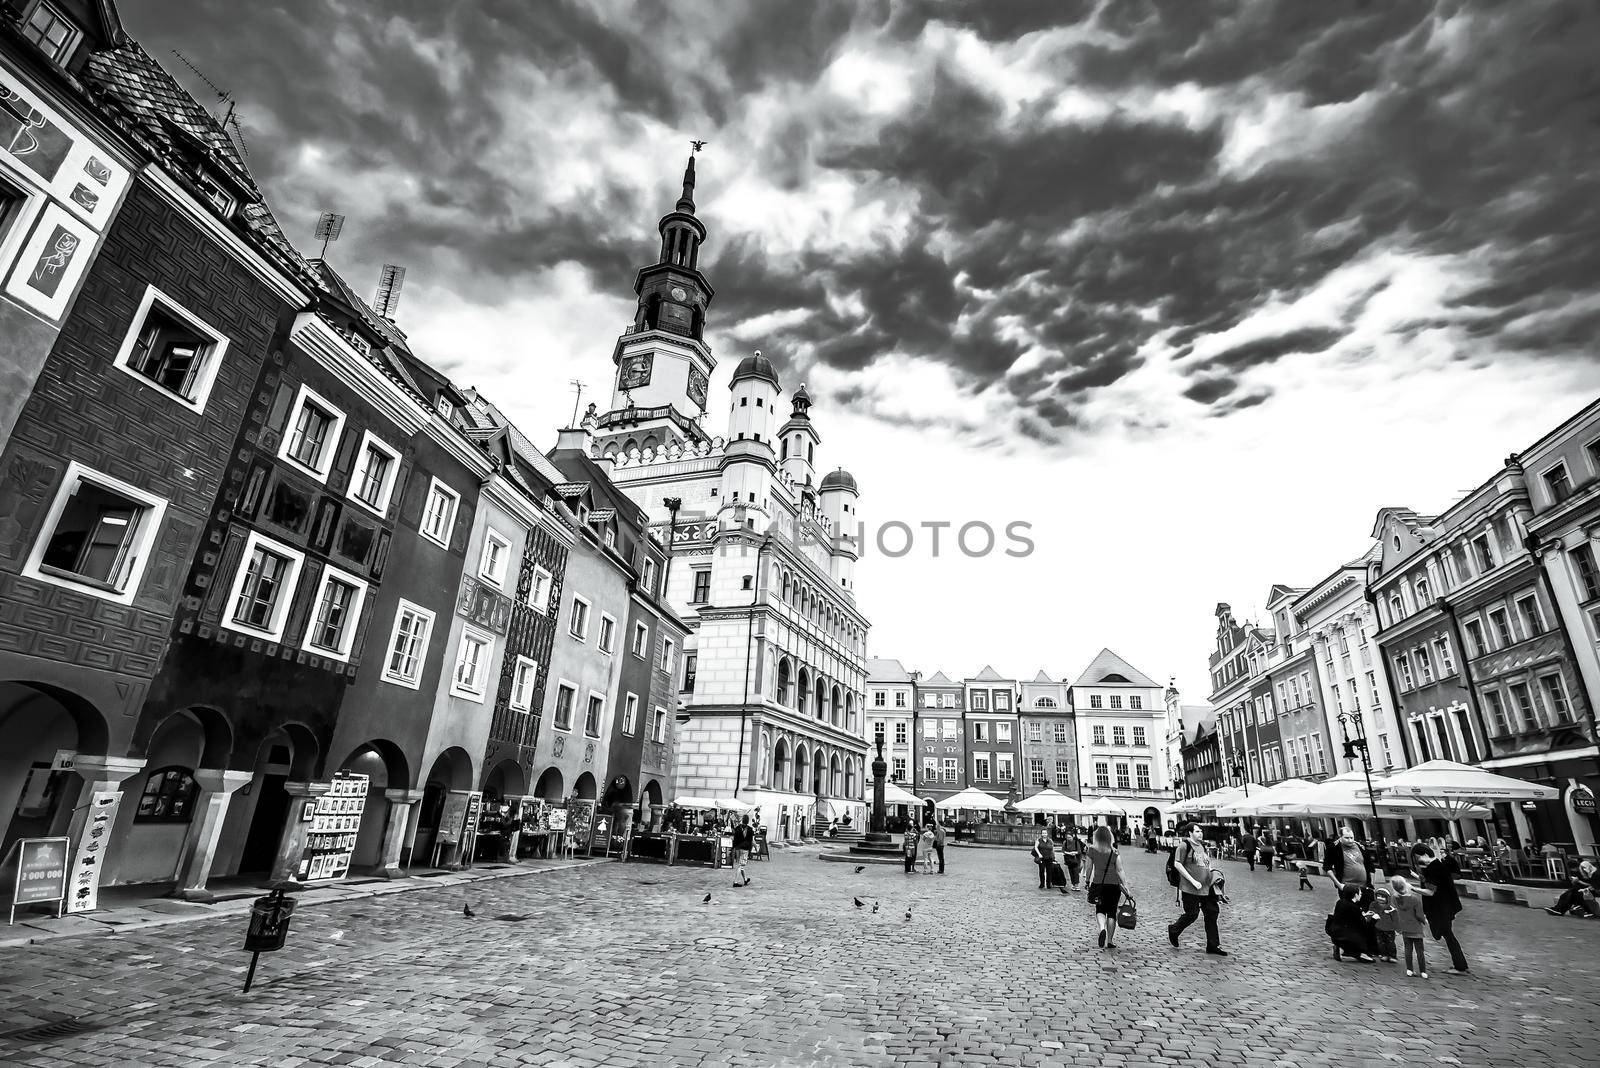 The central square of Poznan by GekaSkr